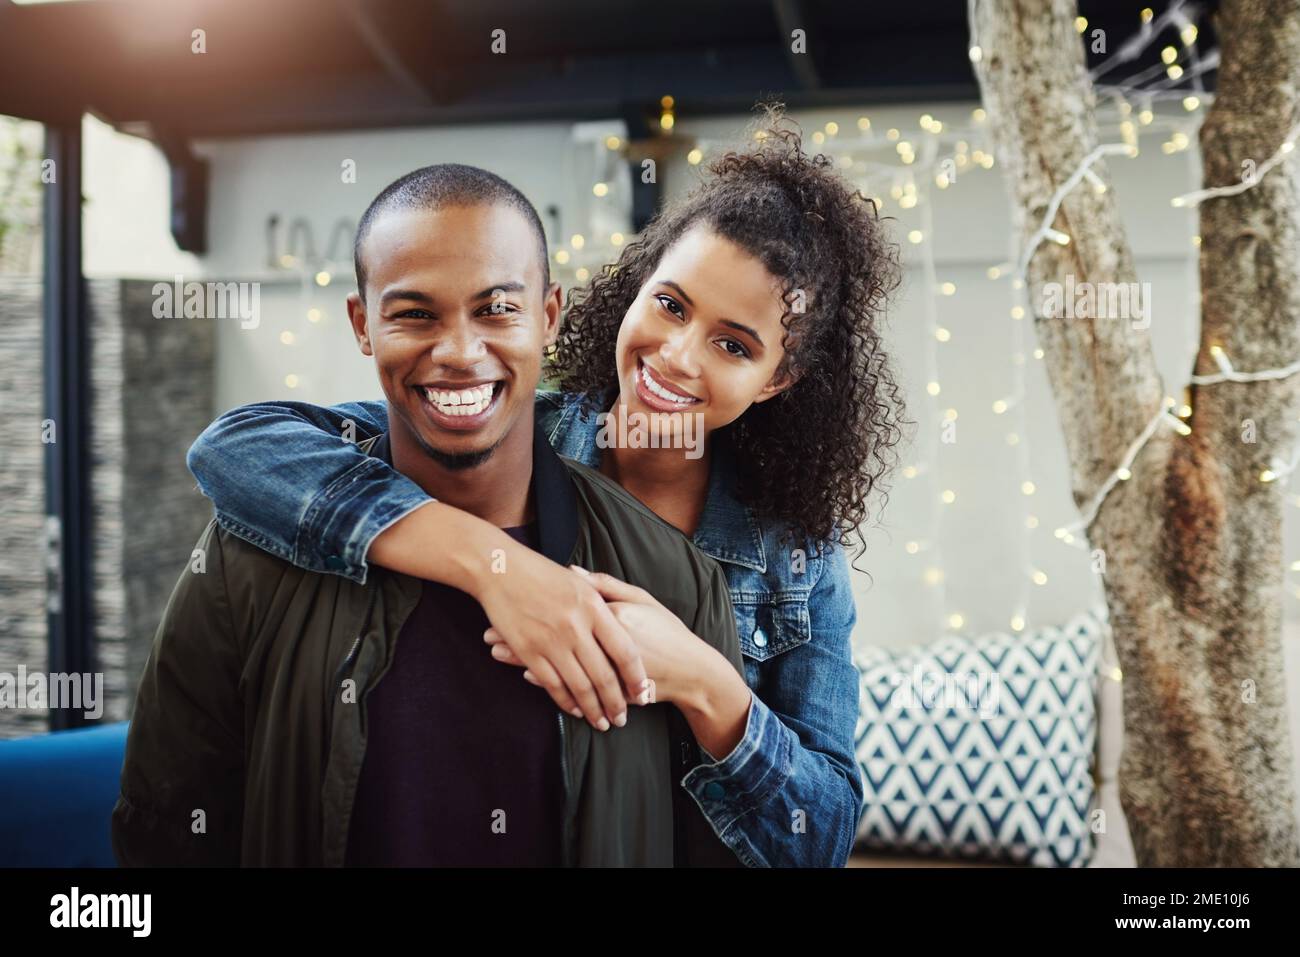 Every date night is special. a happy young couple out on a date. Stock Photo